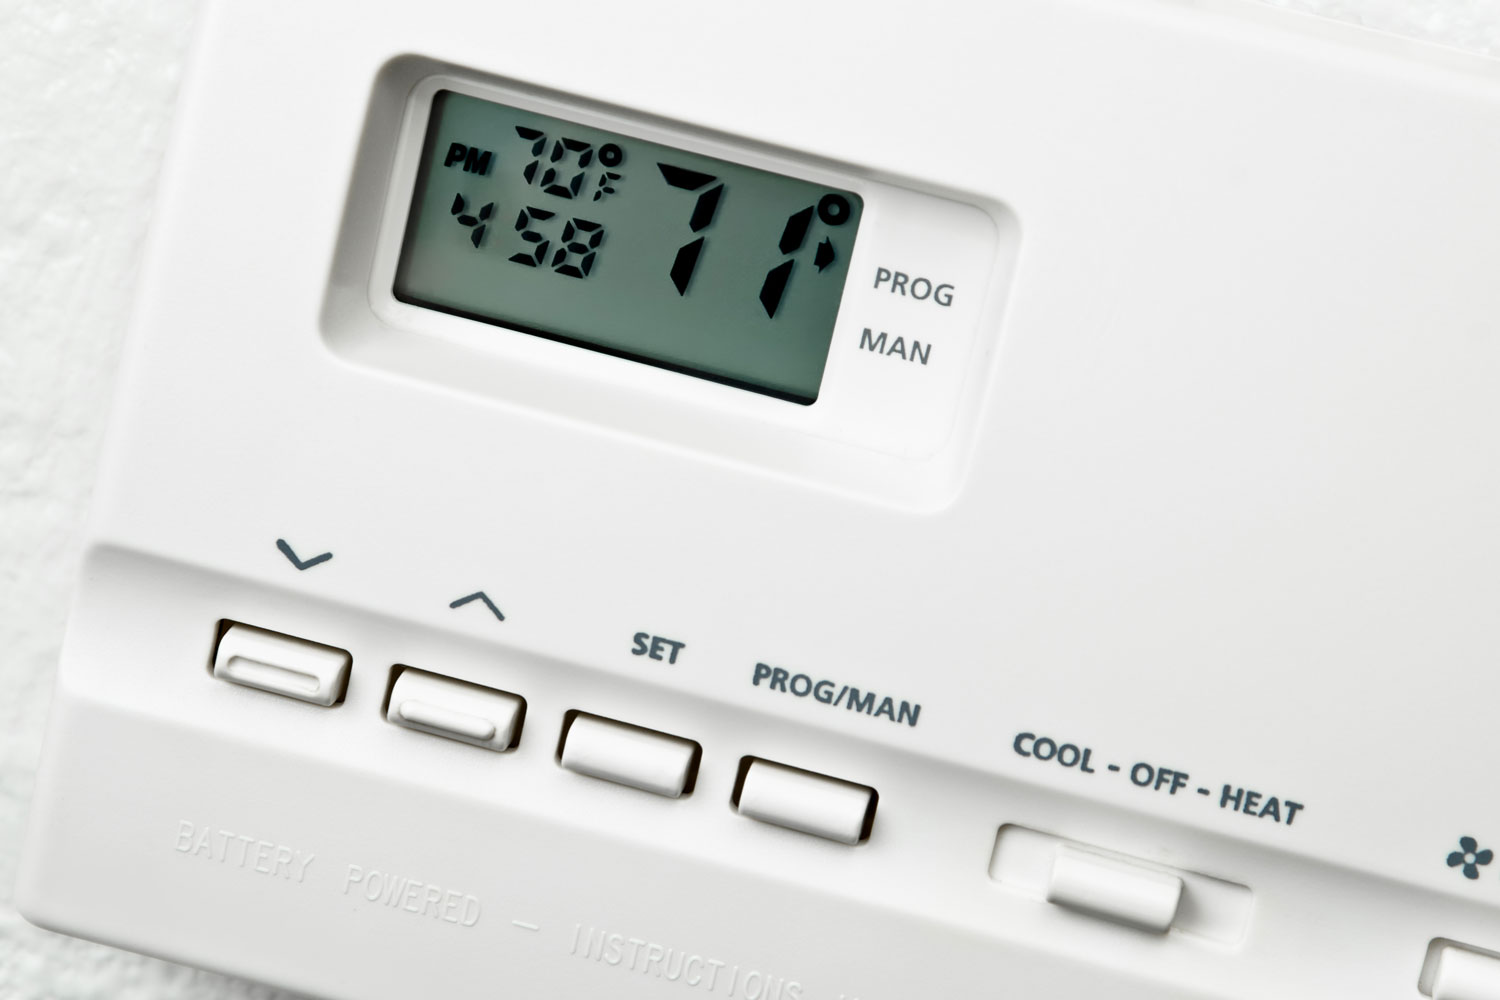 A digital thermostat indicating 71 degrees in the display